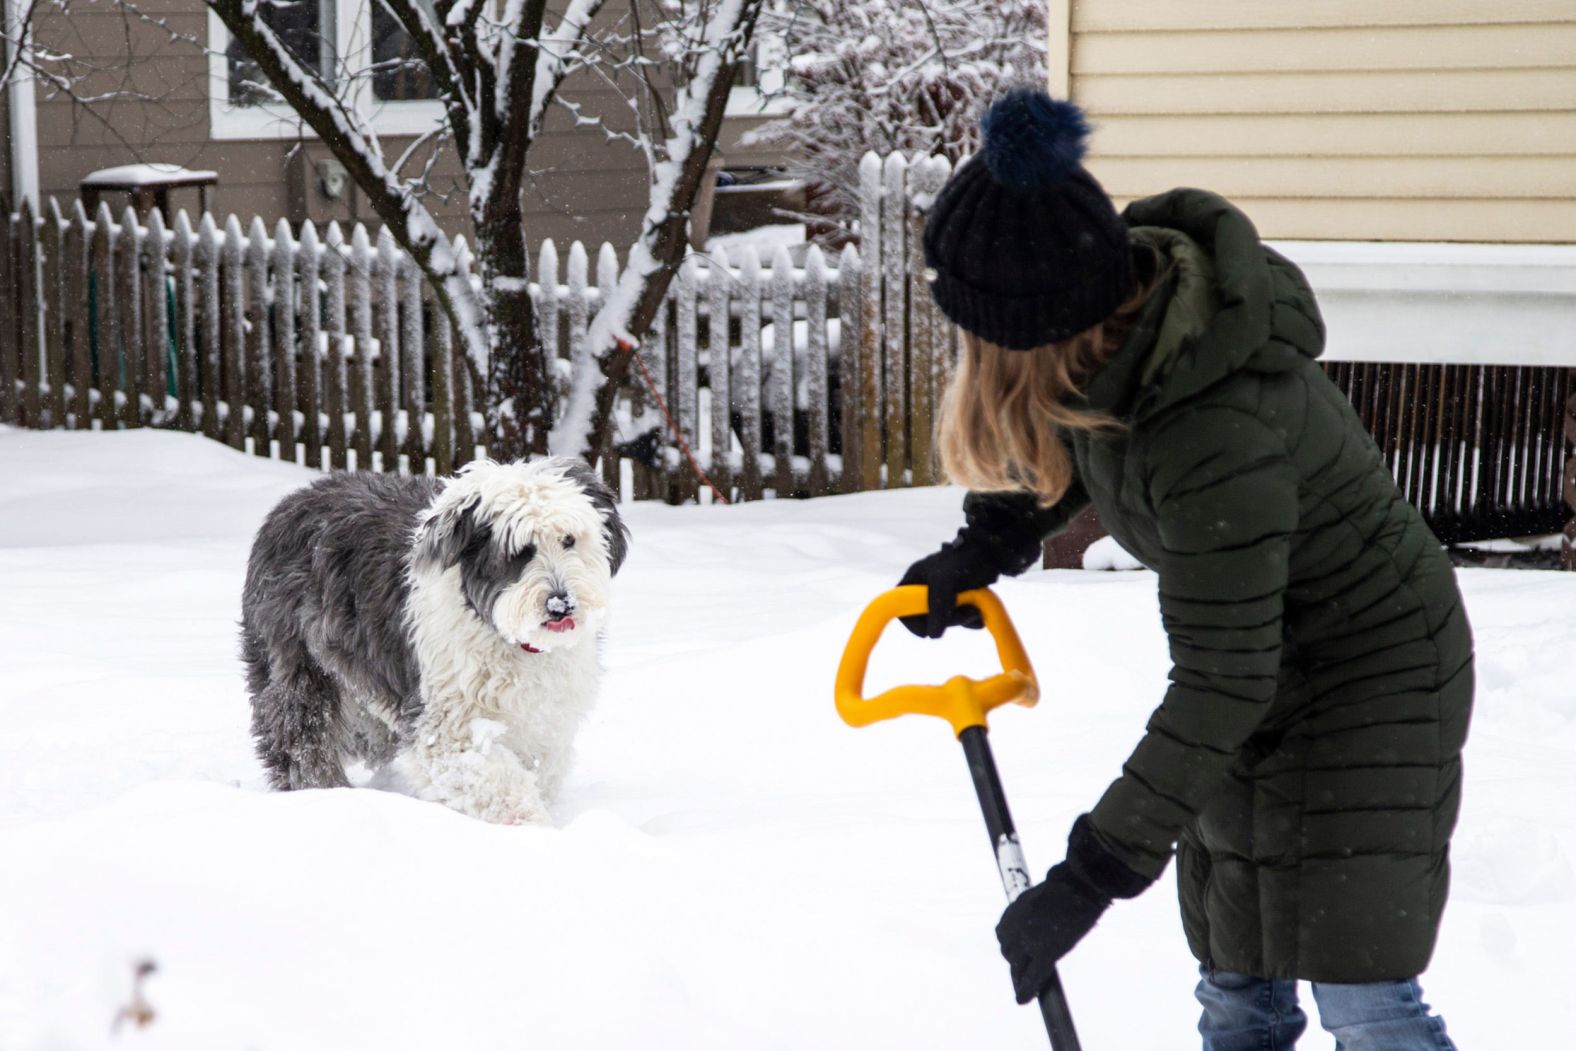 Sophie, a 5-year-old English sheepdog, plays in the snow as Gosia Clore shovels it in Iowa City, Iowa, on Sunday.